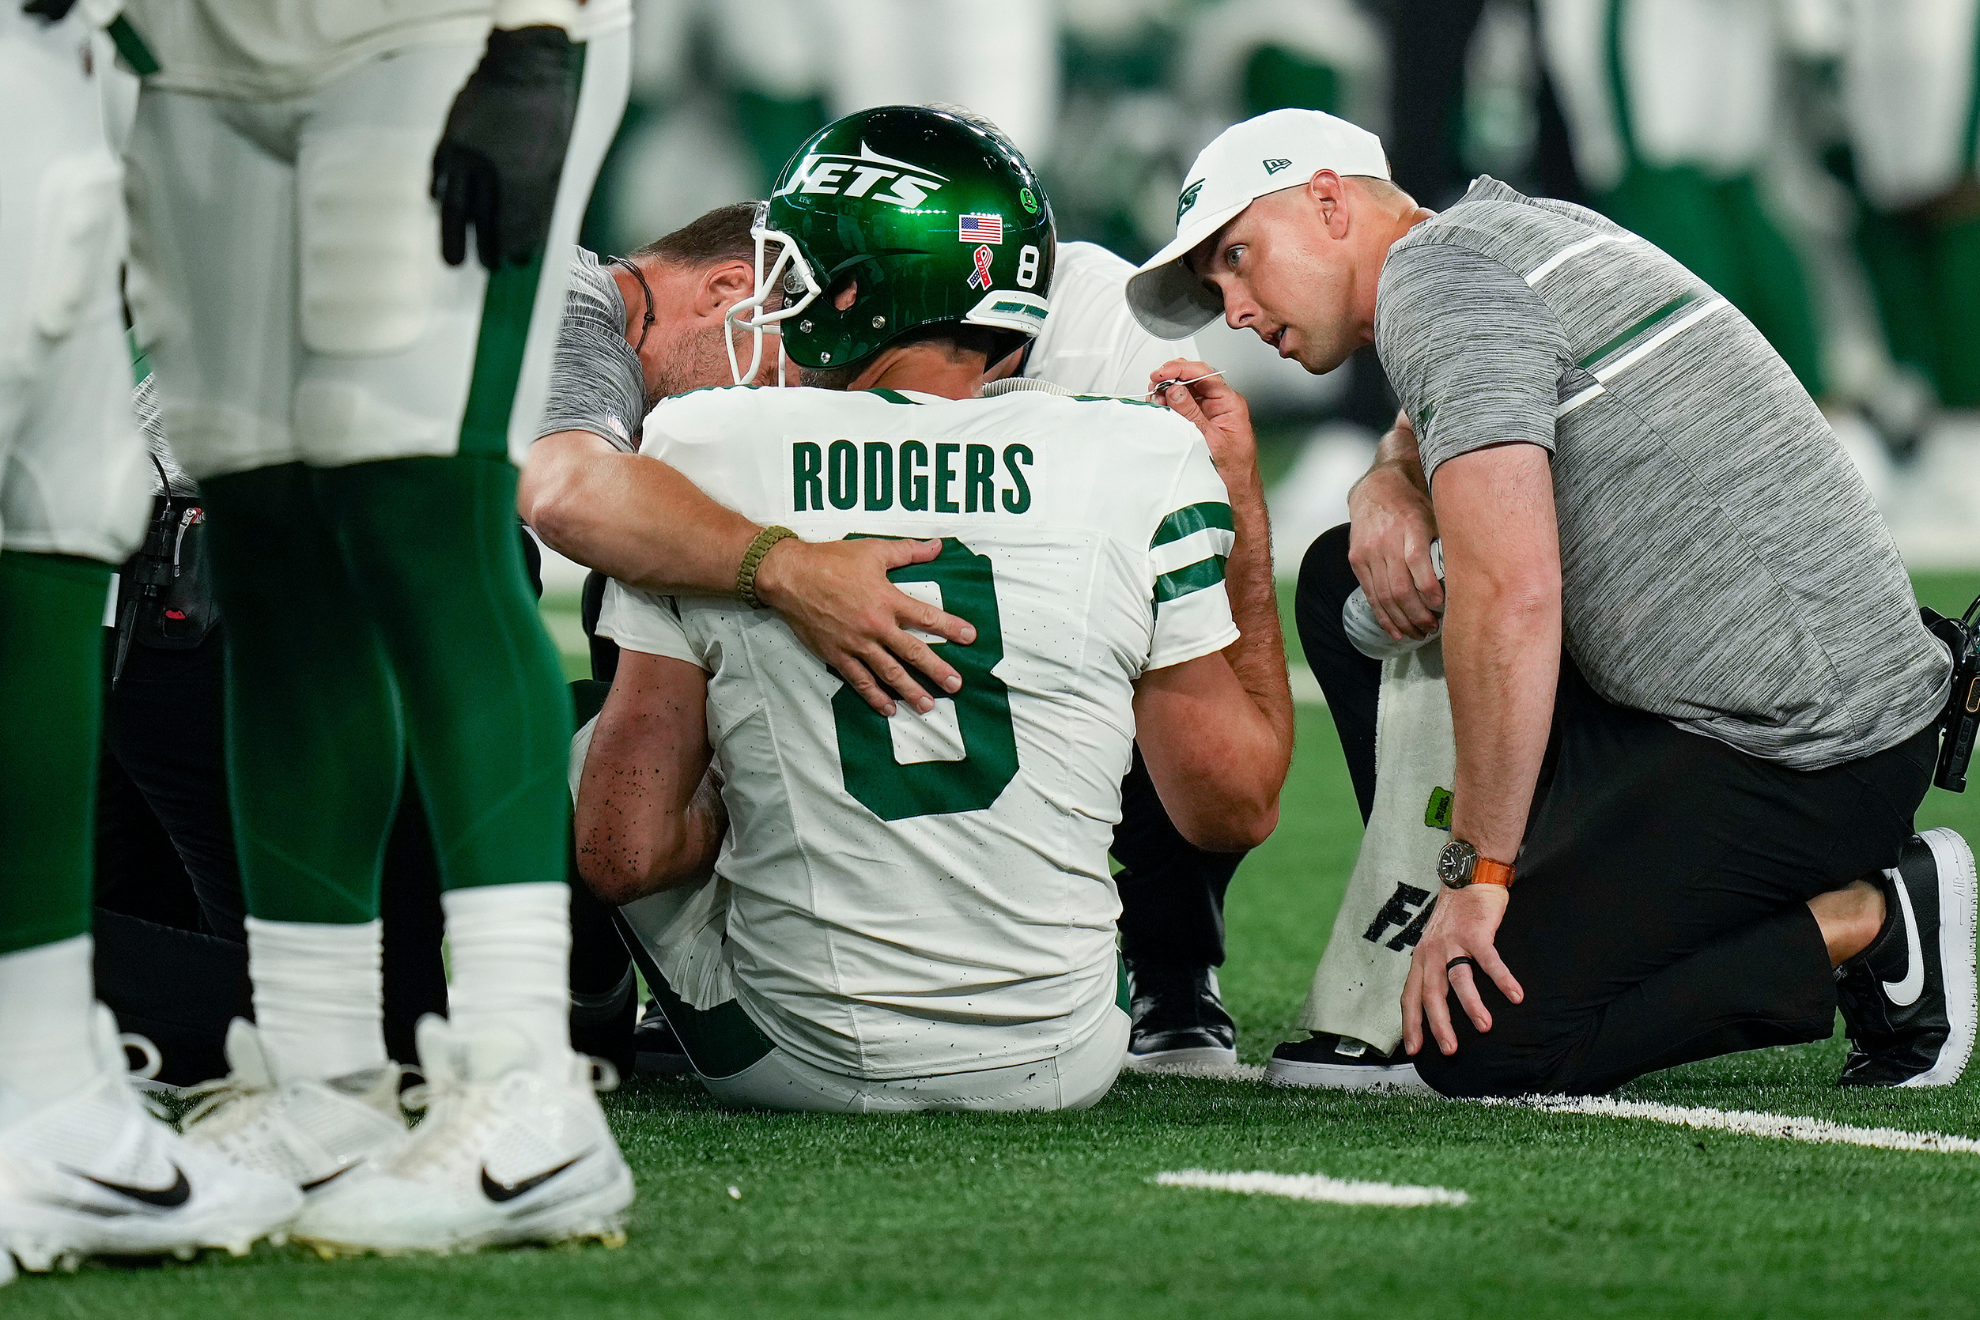 Rodgers was carted off in the first quarter of the Bills-Jets game.